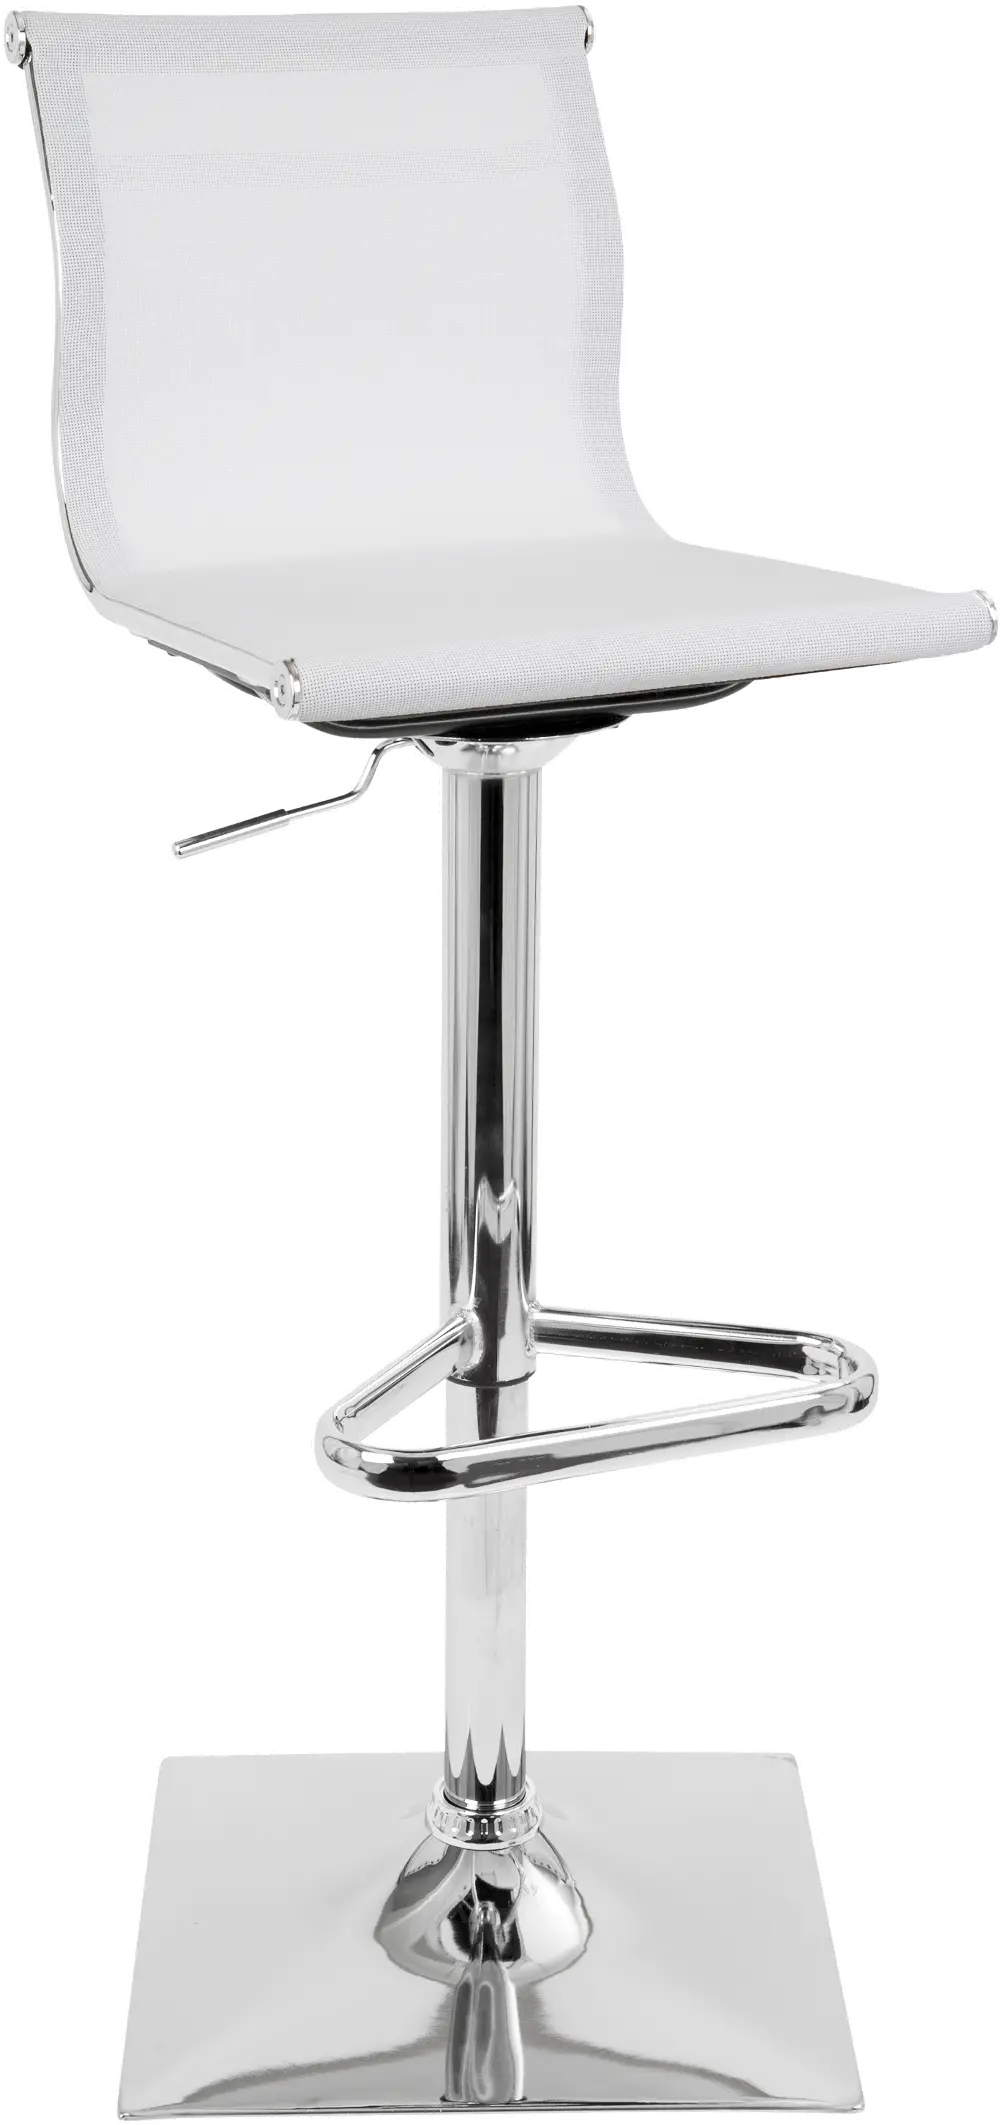 BS-TW-MIRAGE-W Contemporary White and Chrome Adjustable Bar Stool - Mirage-1